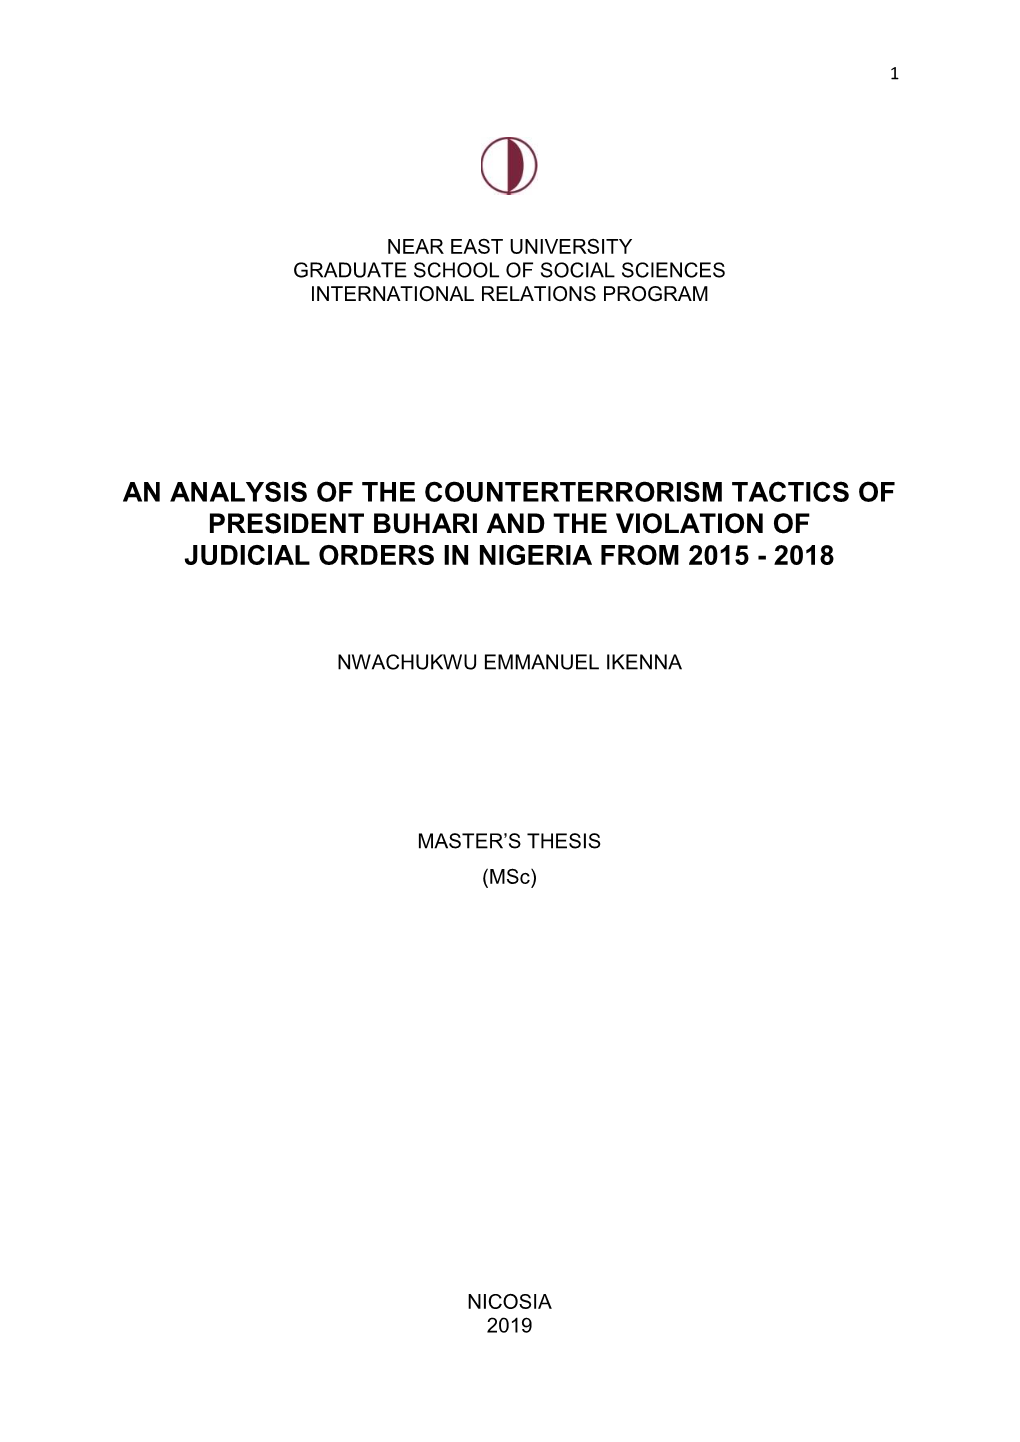 An Analysis of the Counterterrorism Tactics of President Buhari and the Violation of Judicial Orders in Nigeria from 2015